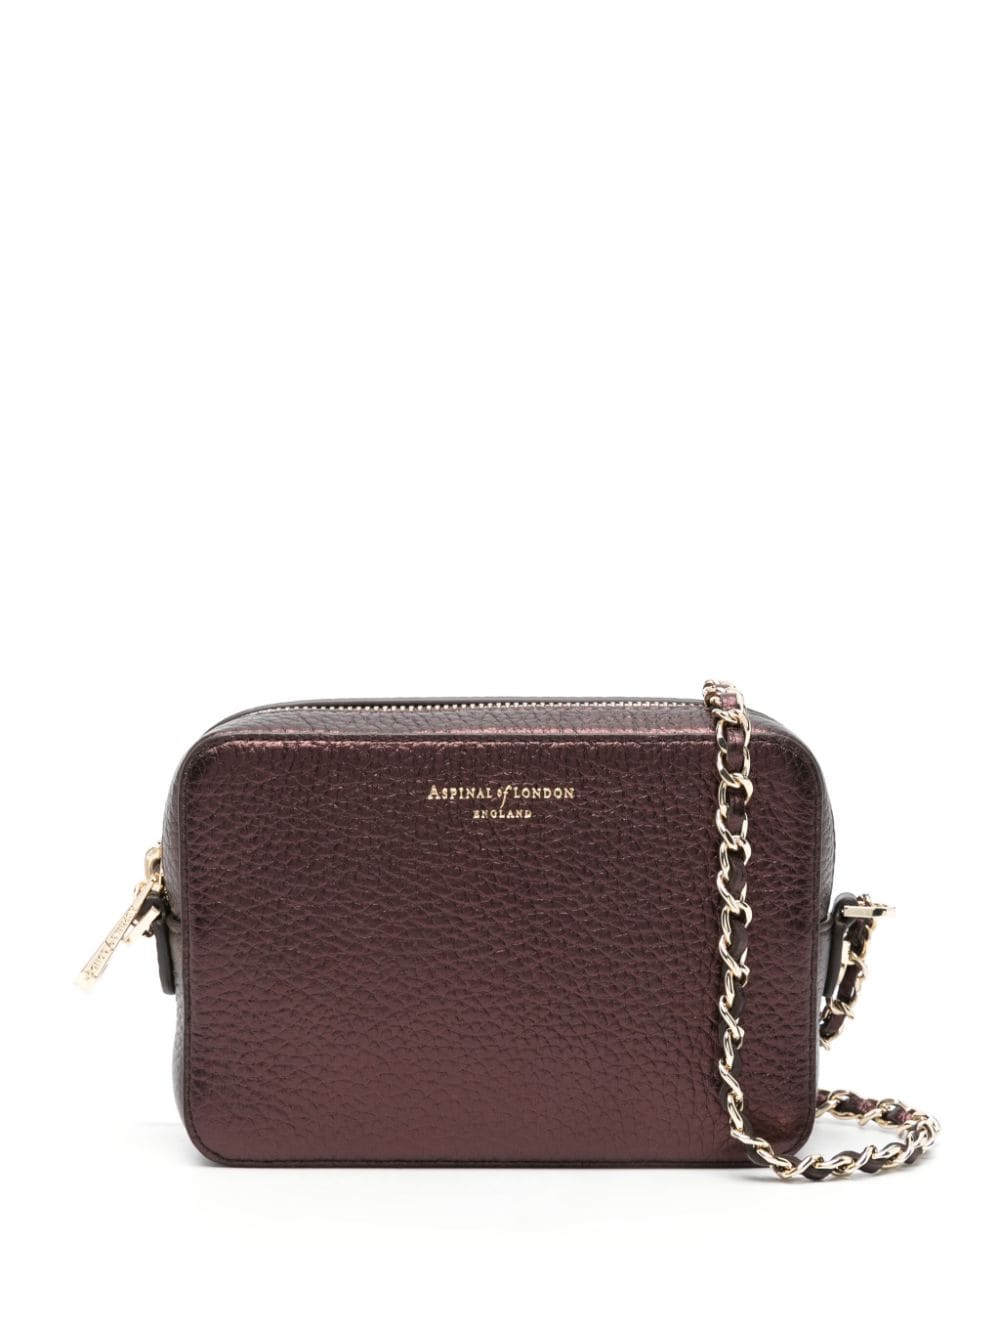 Aspinal Of London Milly leather crossbody bag - Brown von Aspinal Of London